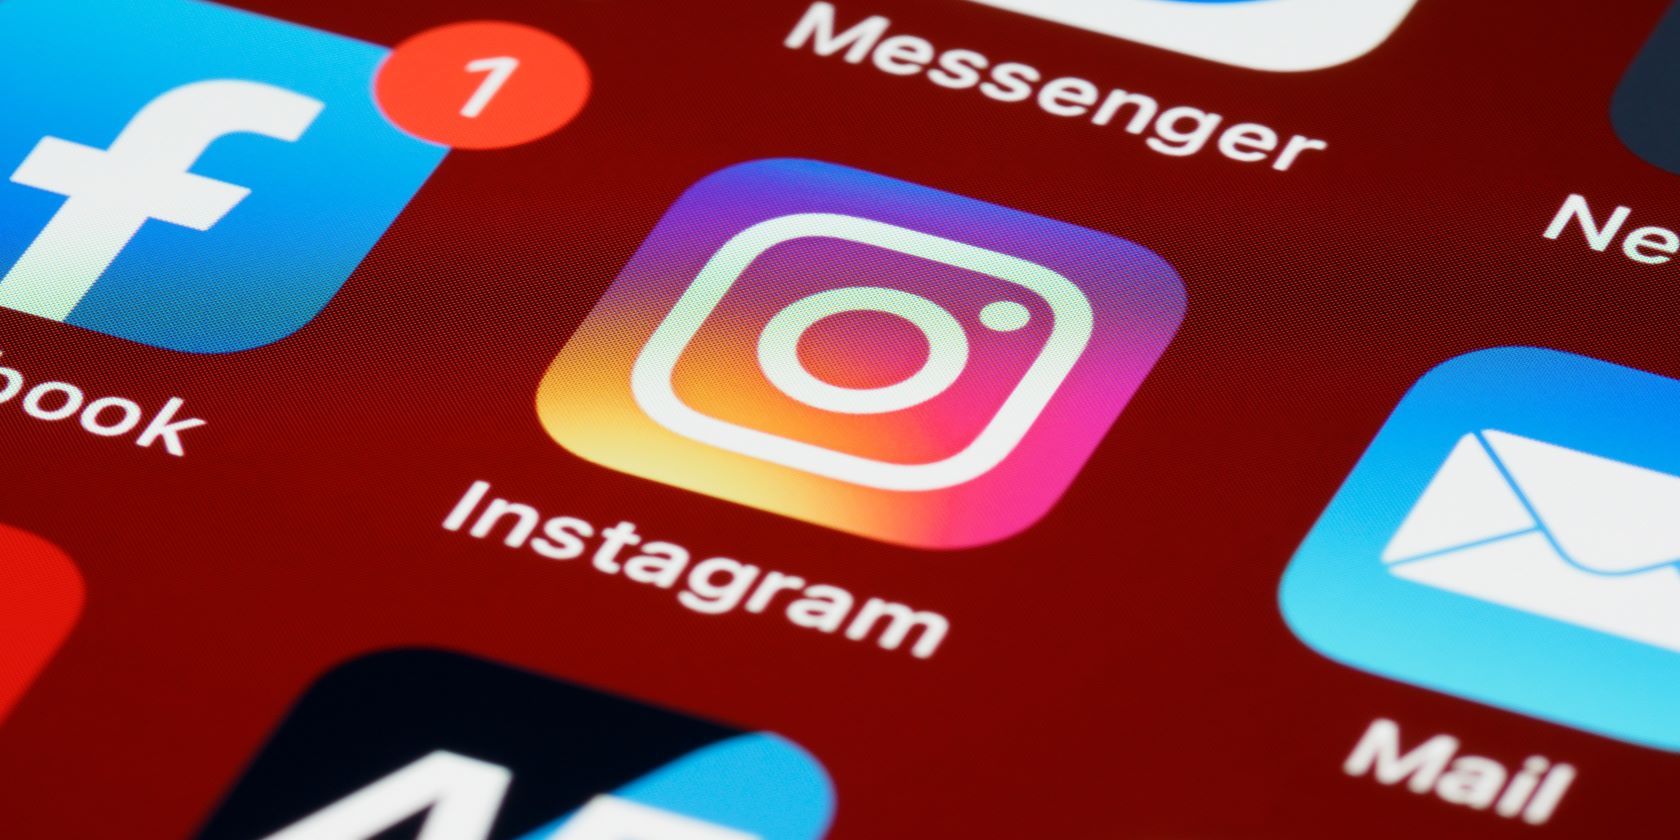 Why Some People Want to “Make Instagram Instagram Again”